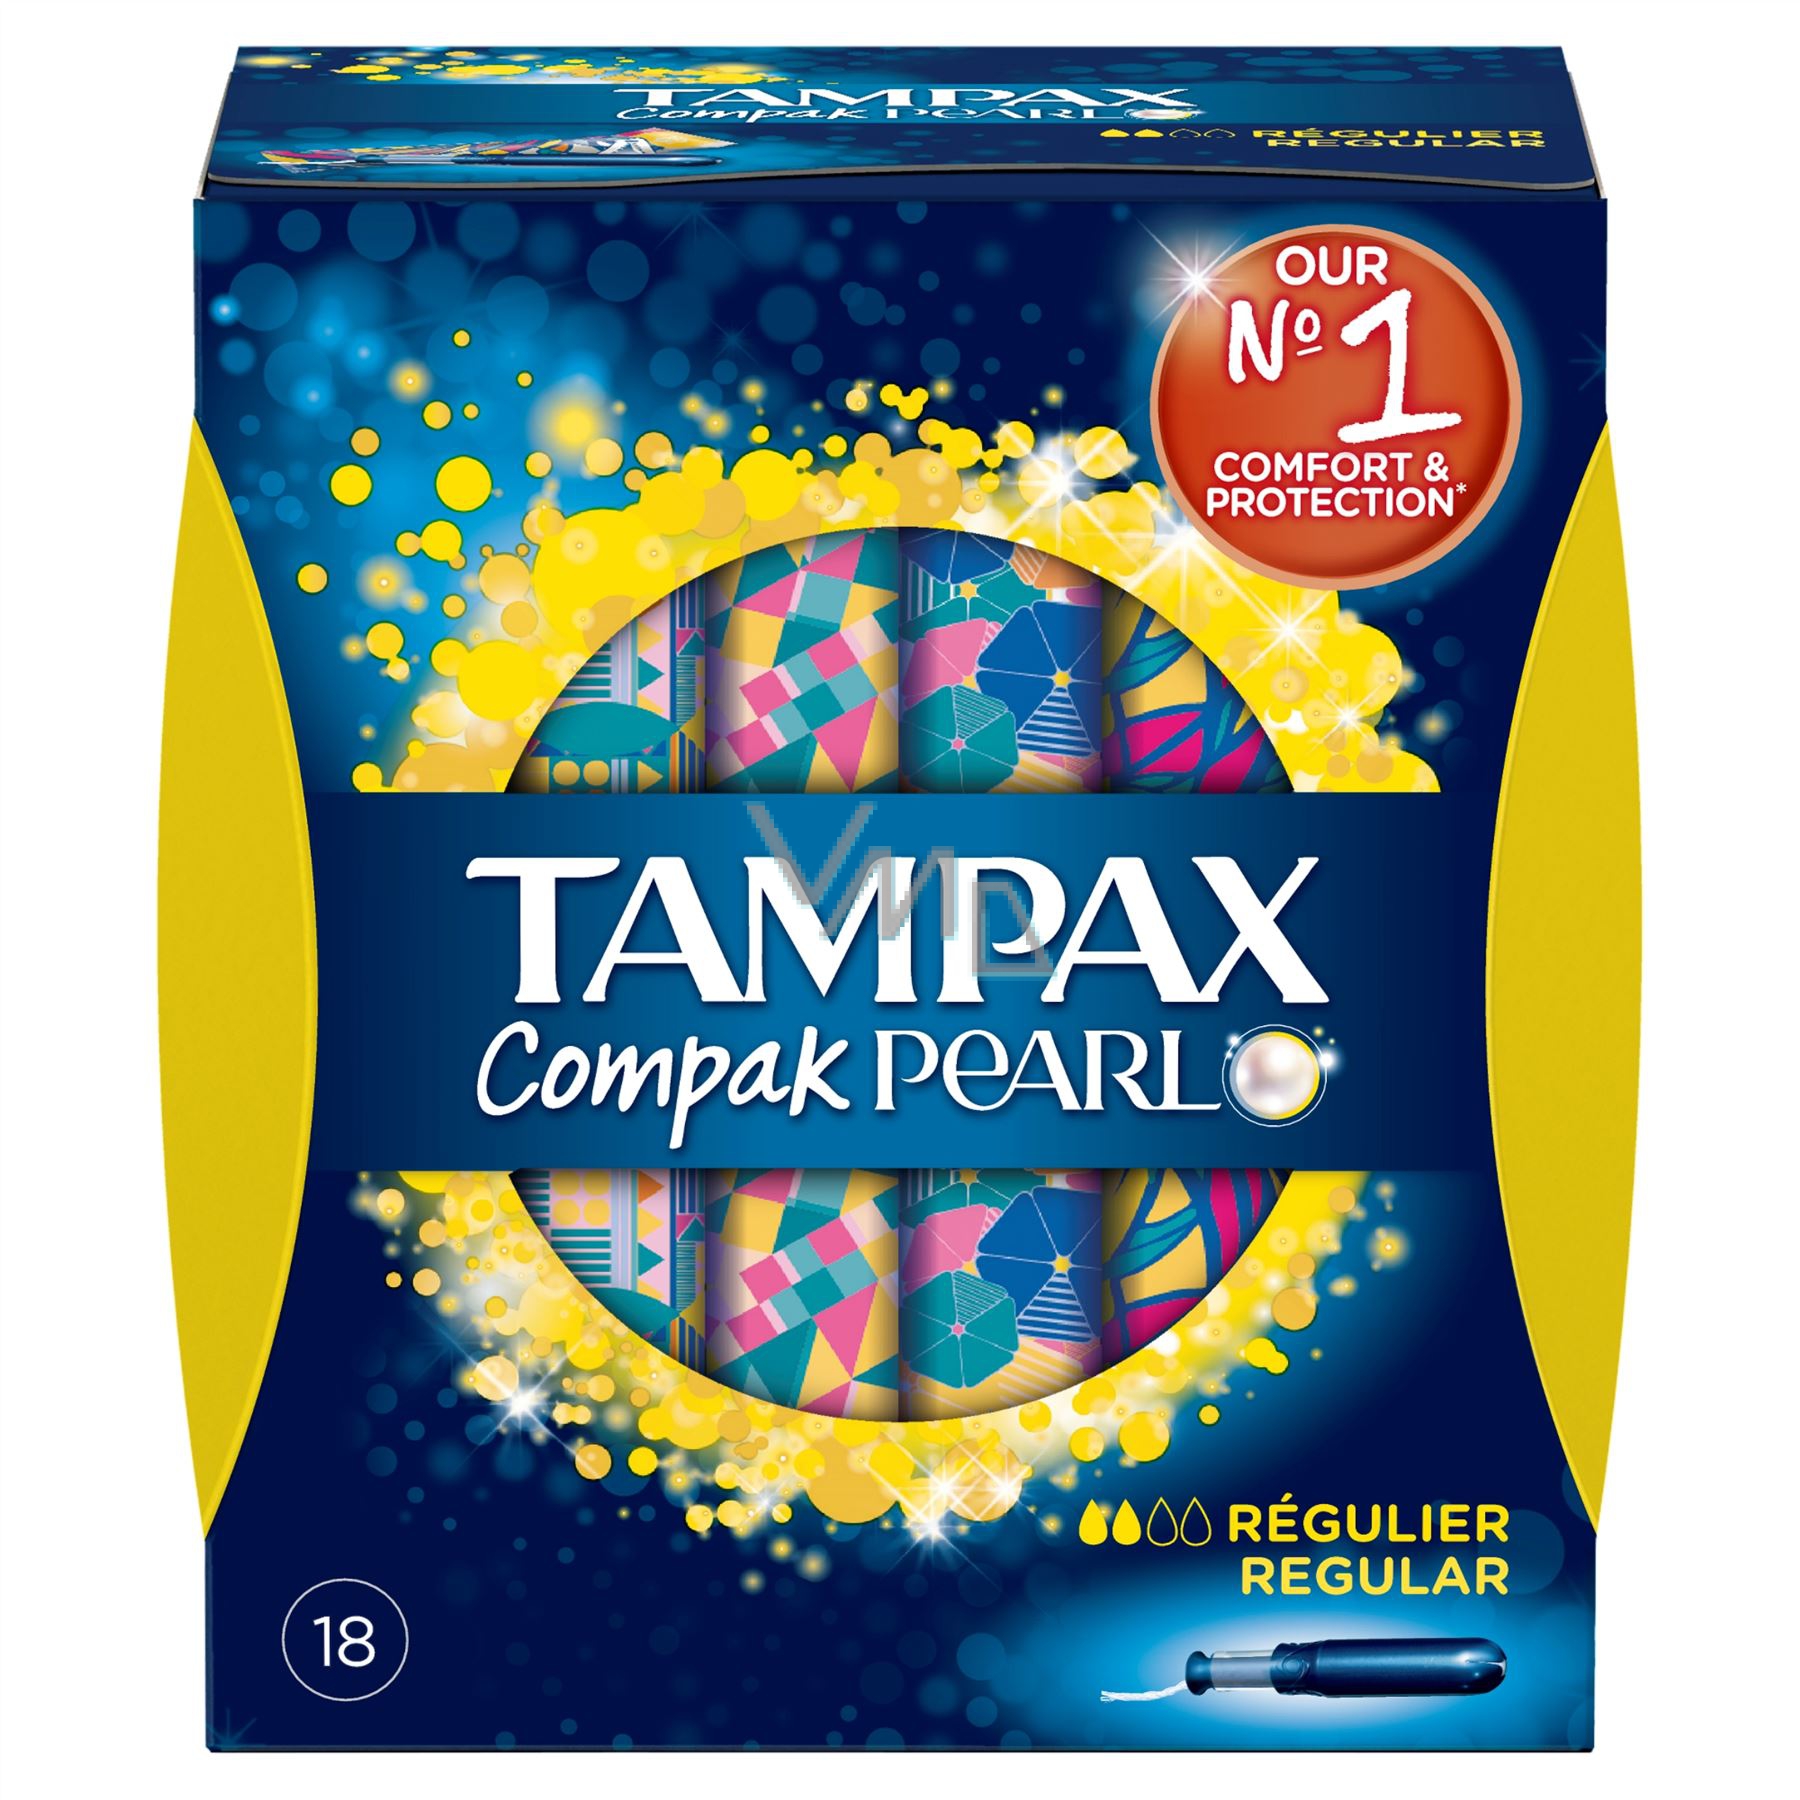 Tampax Compak Pearl Regular women's tampons with 18-piece